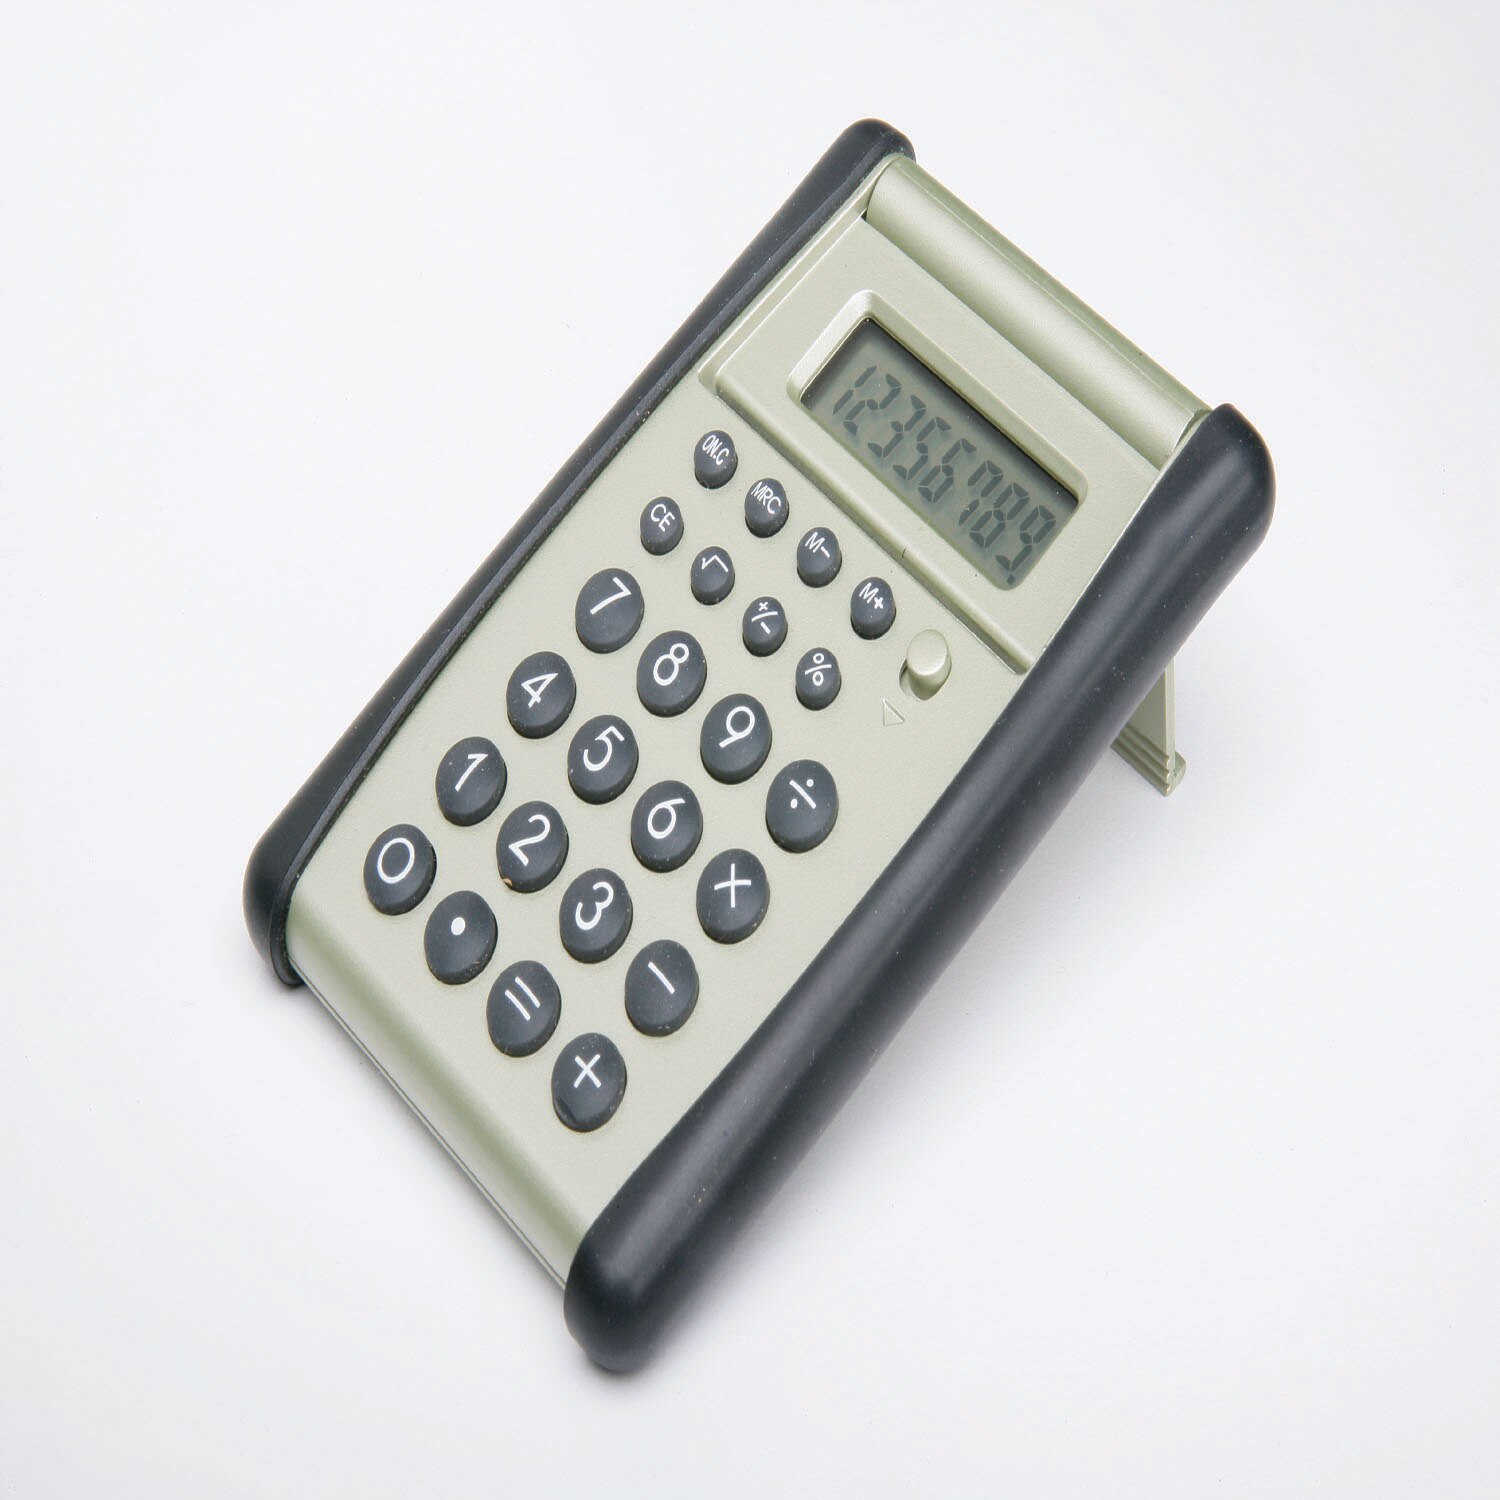 Calculator, Flip-Up, 8-Digit, Black and Silver